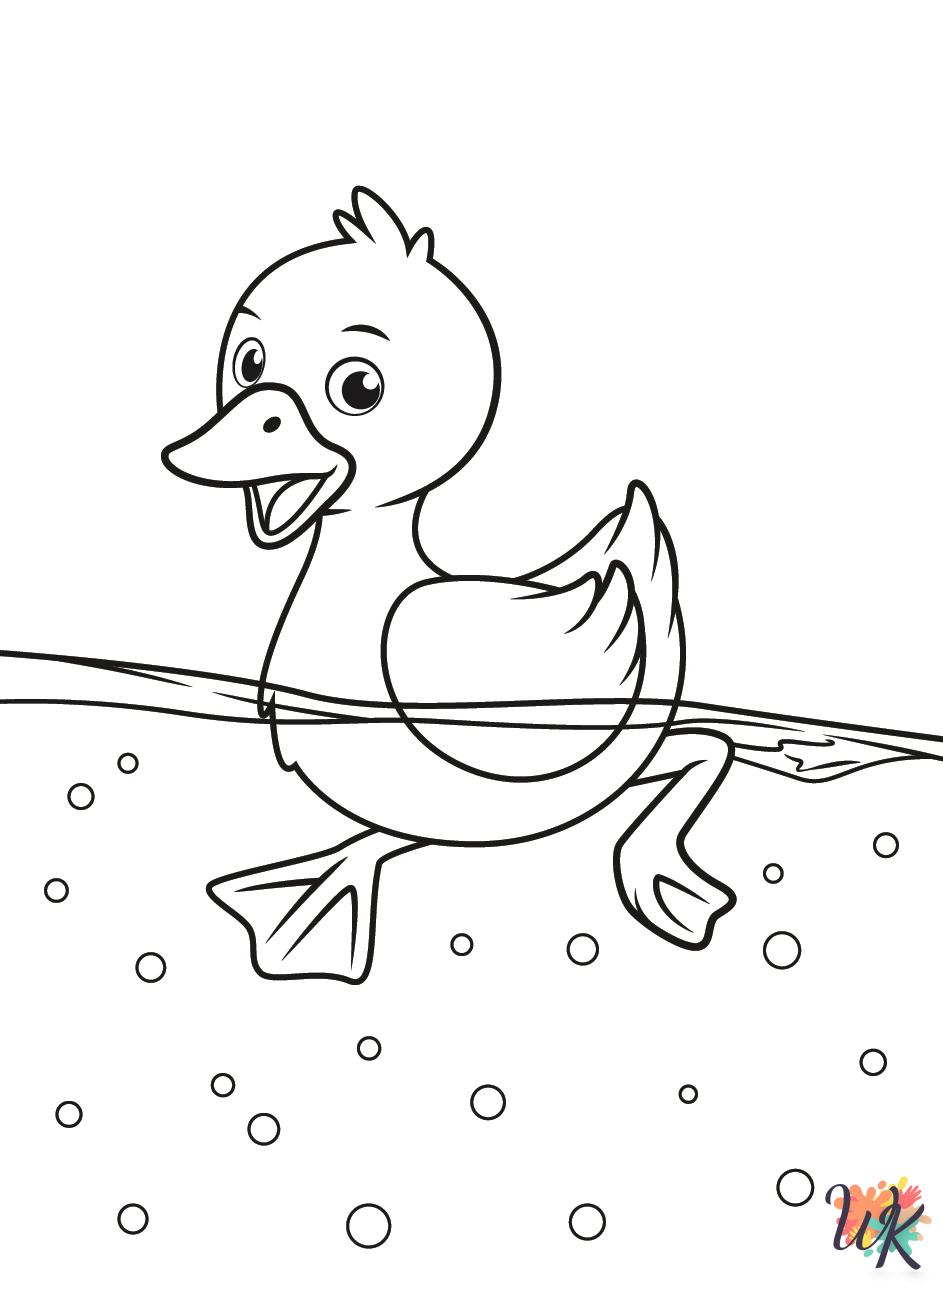 Ducks printable coloring pages